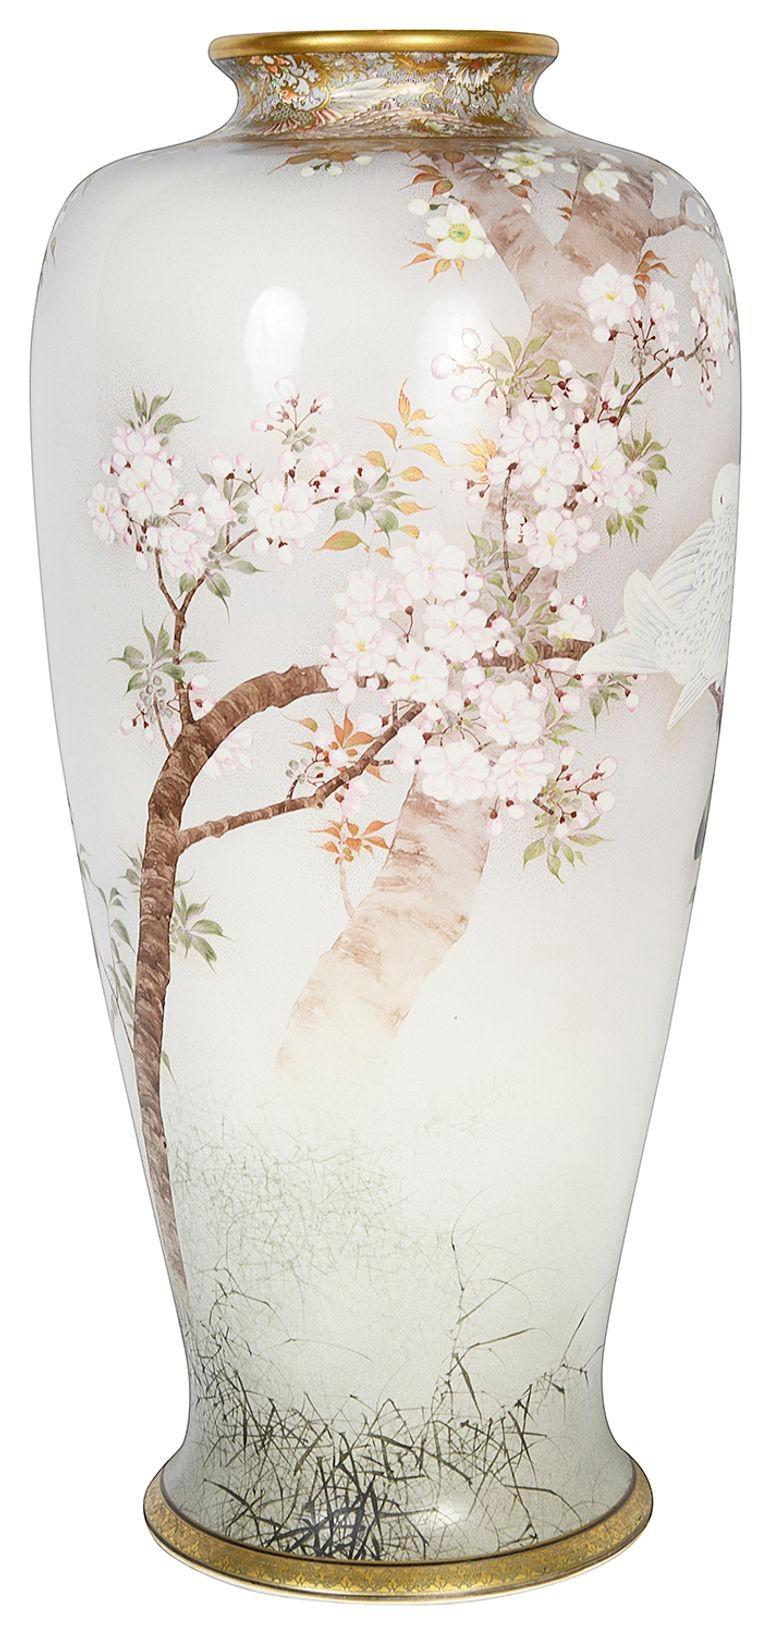 A fine quality Meiji period (1868-1912) Japanese Satsuma vase by Kinkozan.
The vase of a slender elegant shape, depicting gilded rims with exotic mythical birds around the neck, blossom trees with Doves perched on a branch.
Signed; Kinkozan to the